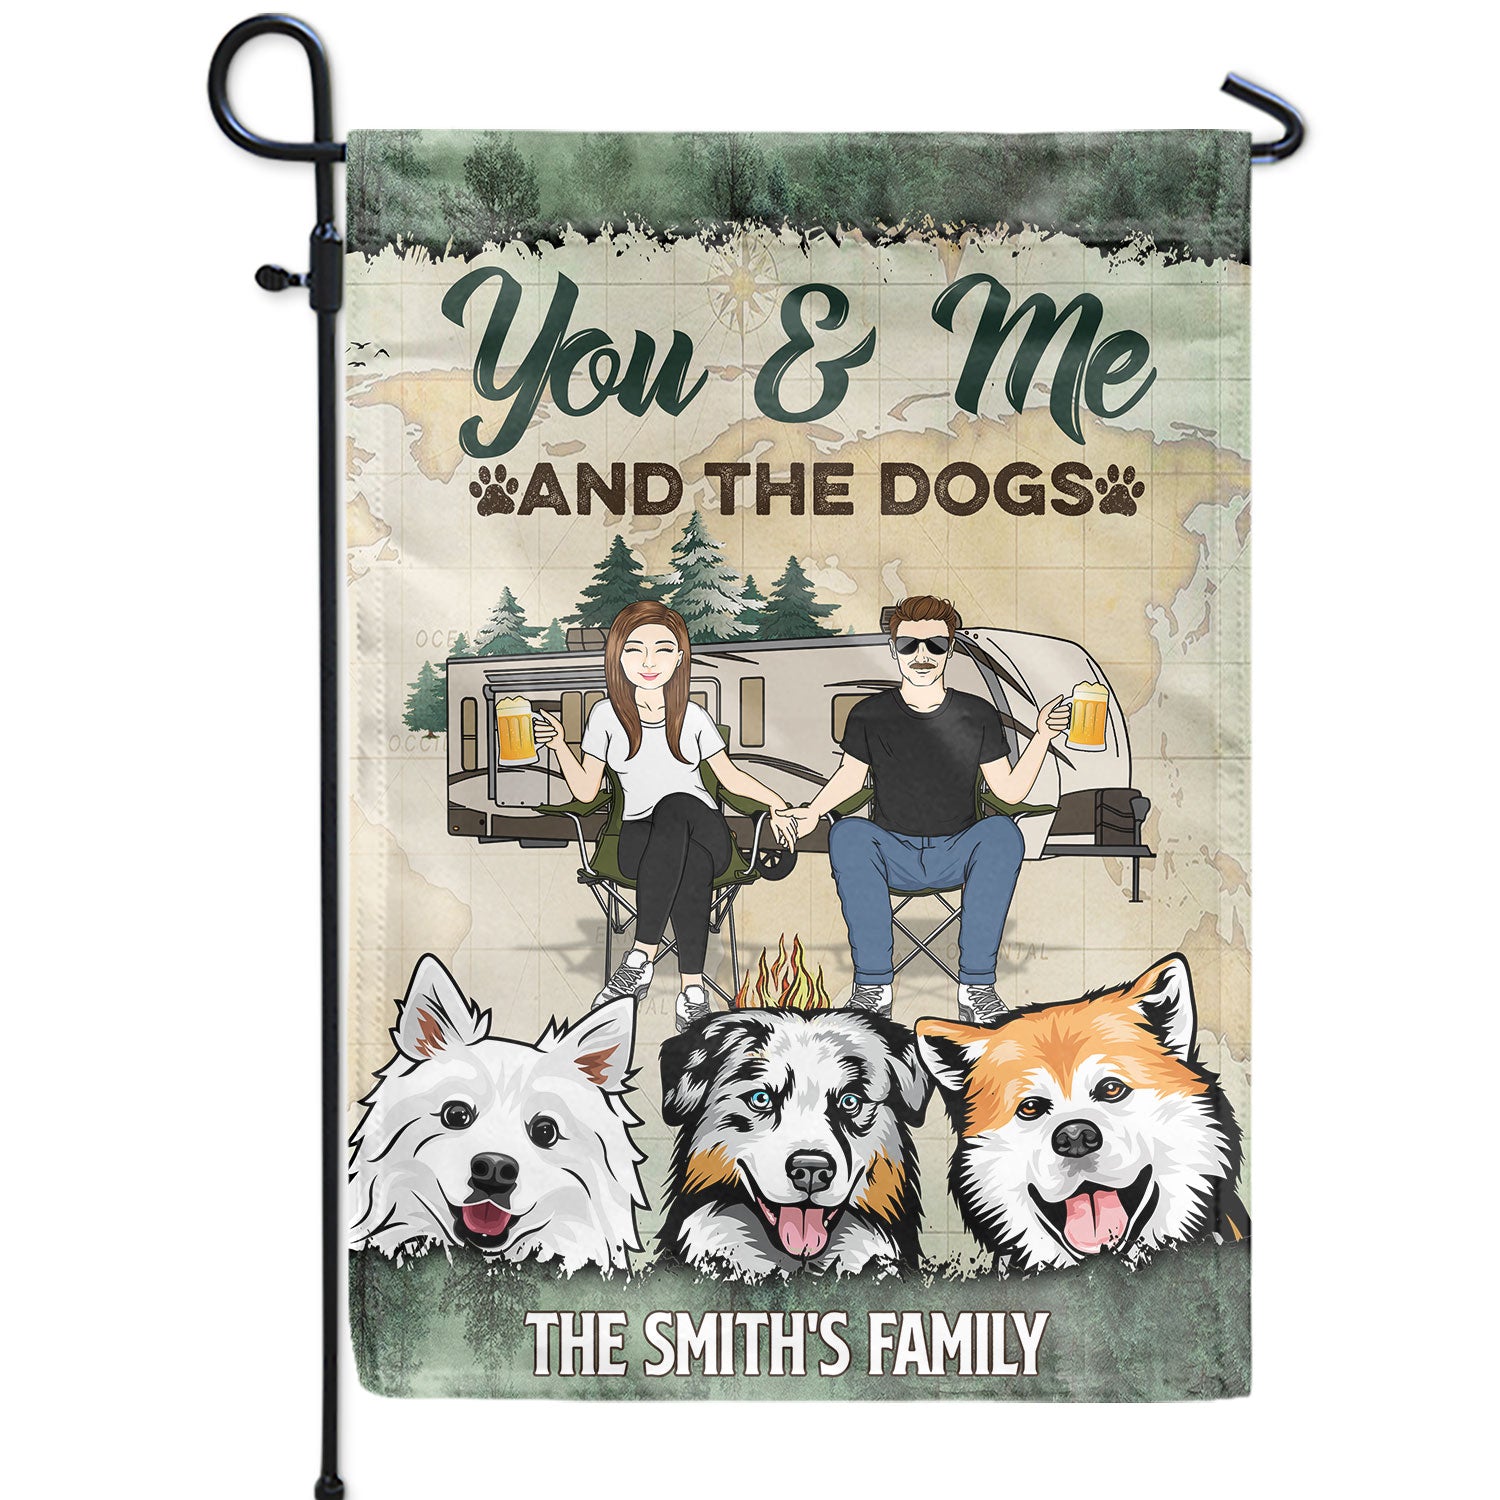 You & Me And The Dogs Cats - Gift For Pet, Camping Lovers, Campsite, Camping Decor, Couple, Family - Personalized Custom Flag